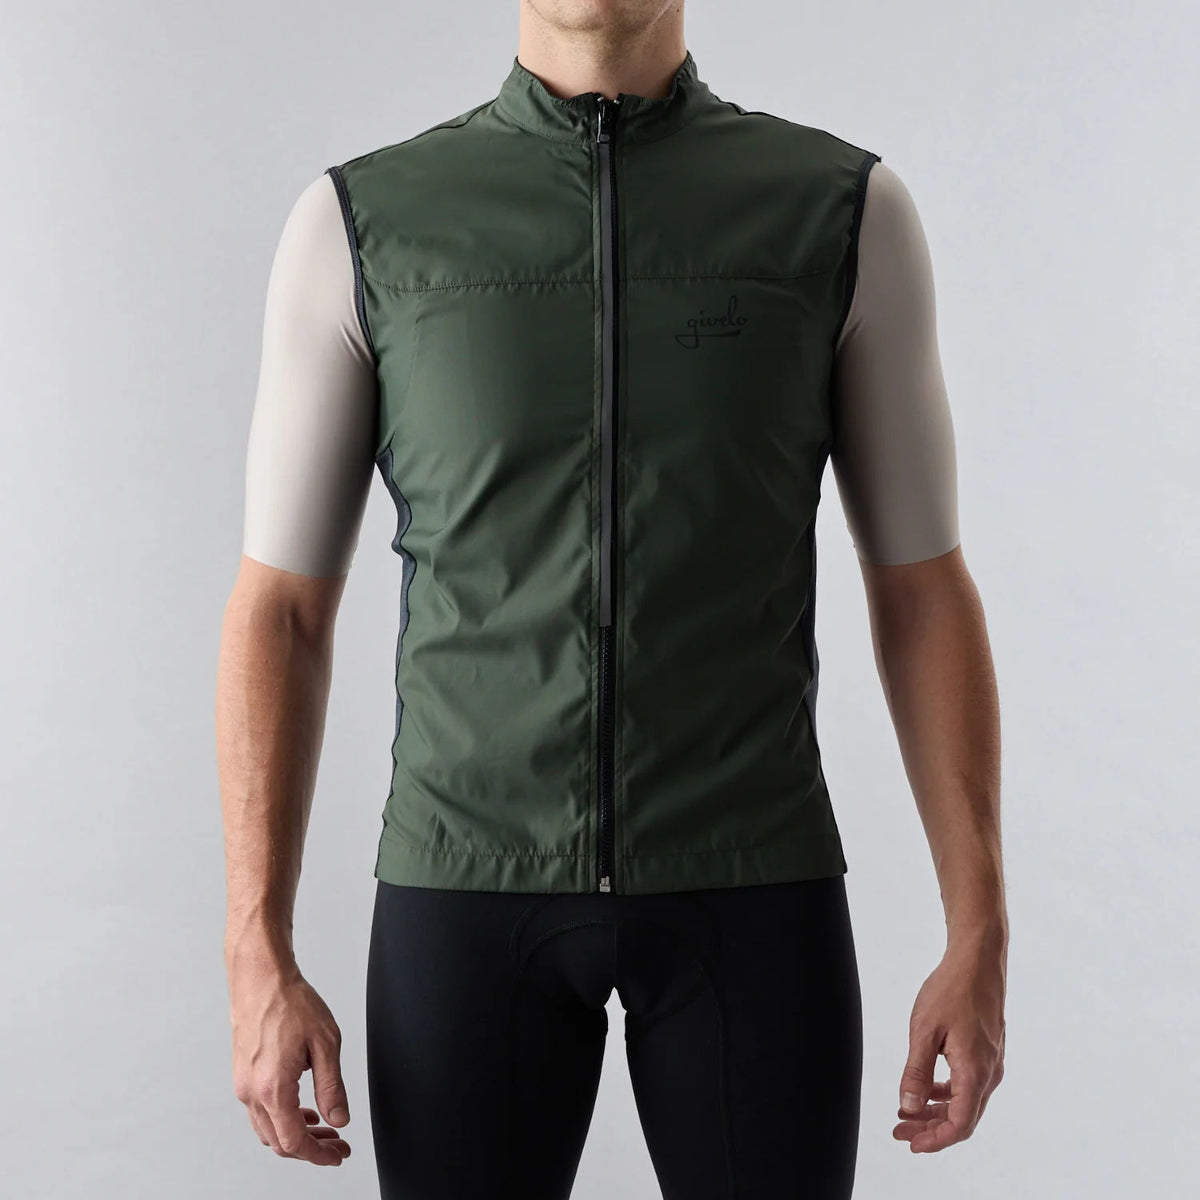 Givelo Quick-Free Gilet Military Green メンズ サイクルジレ | GEARED